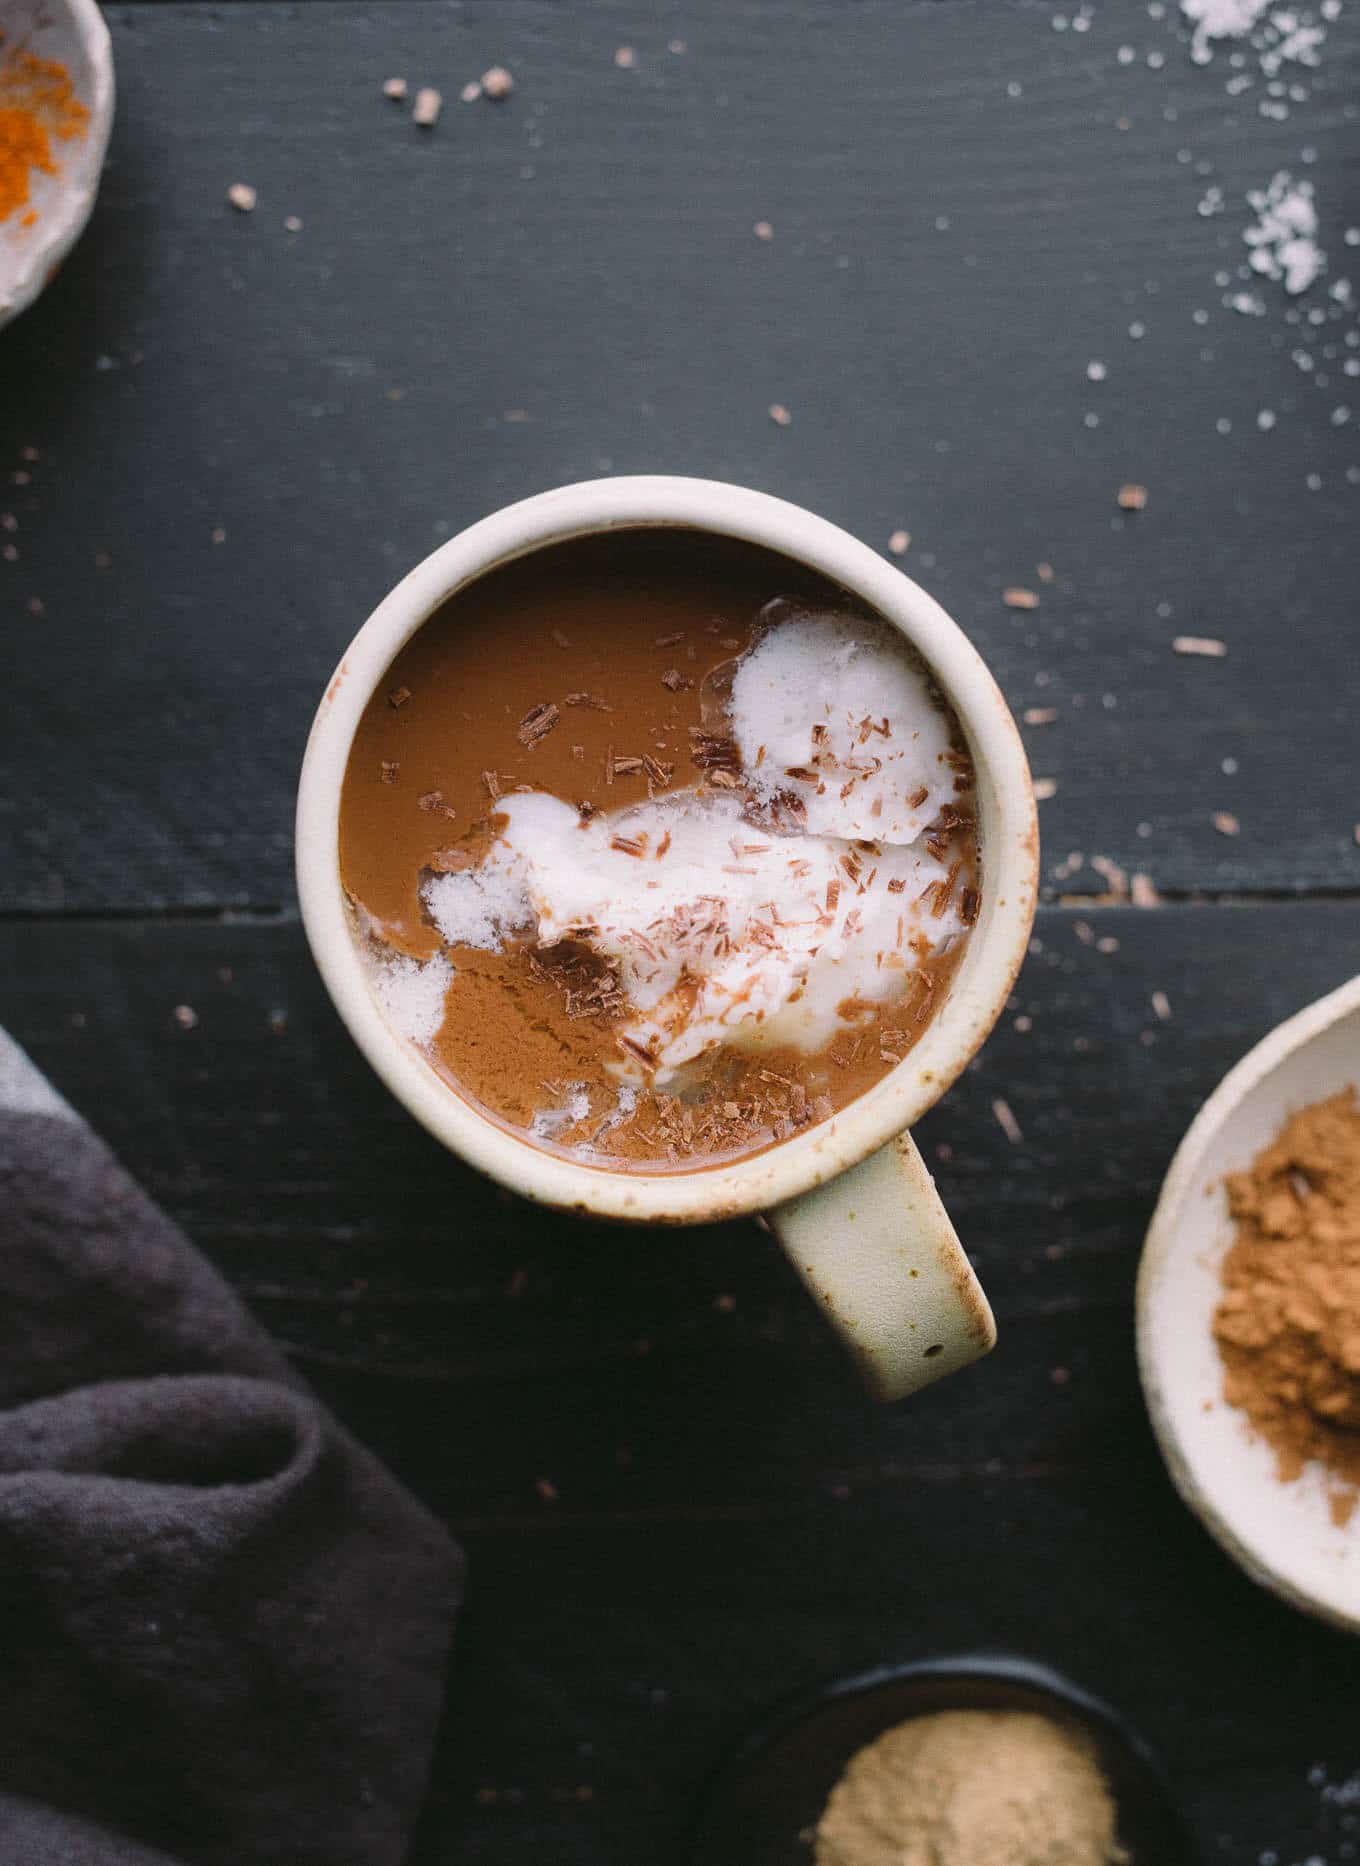 This Superfood Maca Hot Chocolate combines cacao powder, maca powder, cinnamon, cayenne, sea salt, and a touch of maple syrup to make for a rich and healthy hot drink. Gluten-free, vegan, refined sugar-free. 